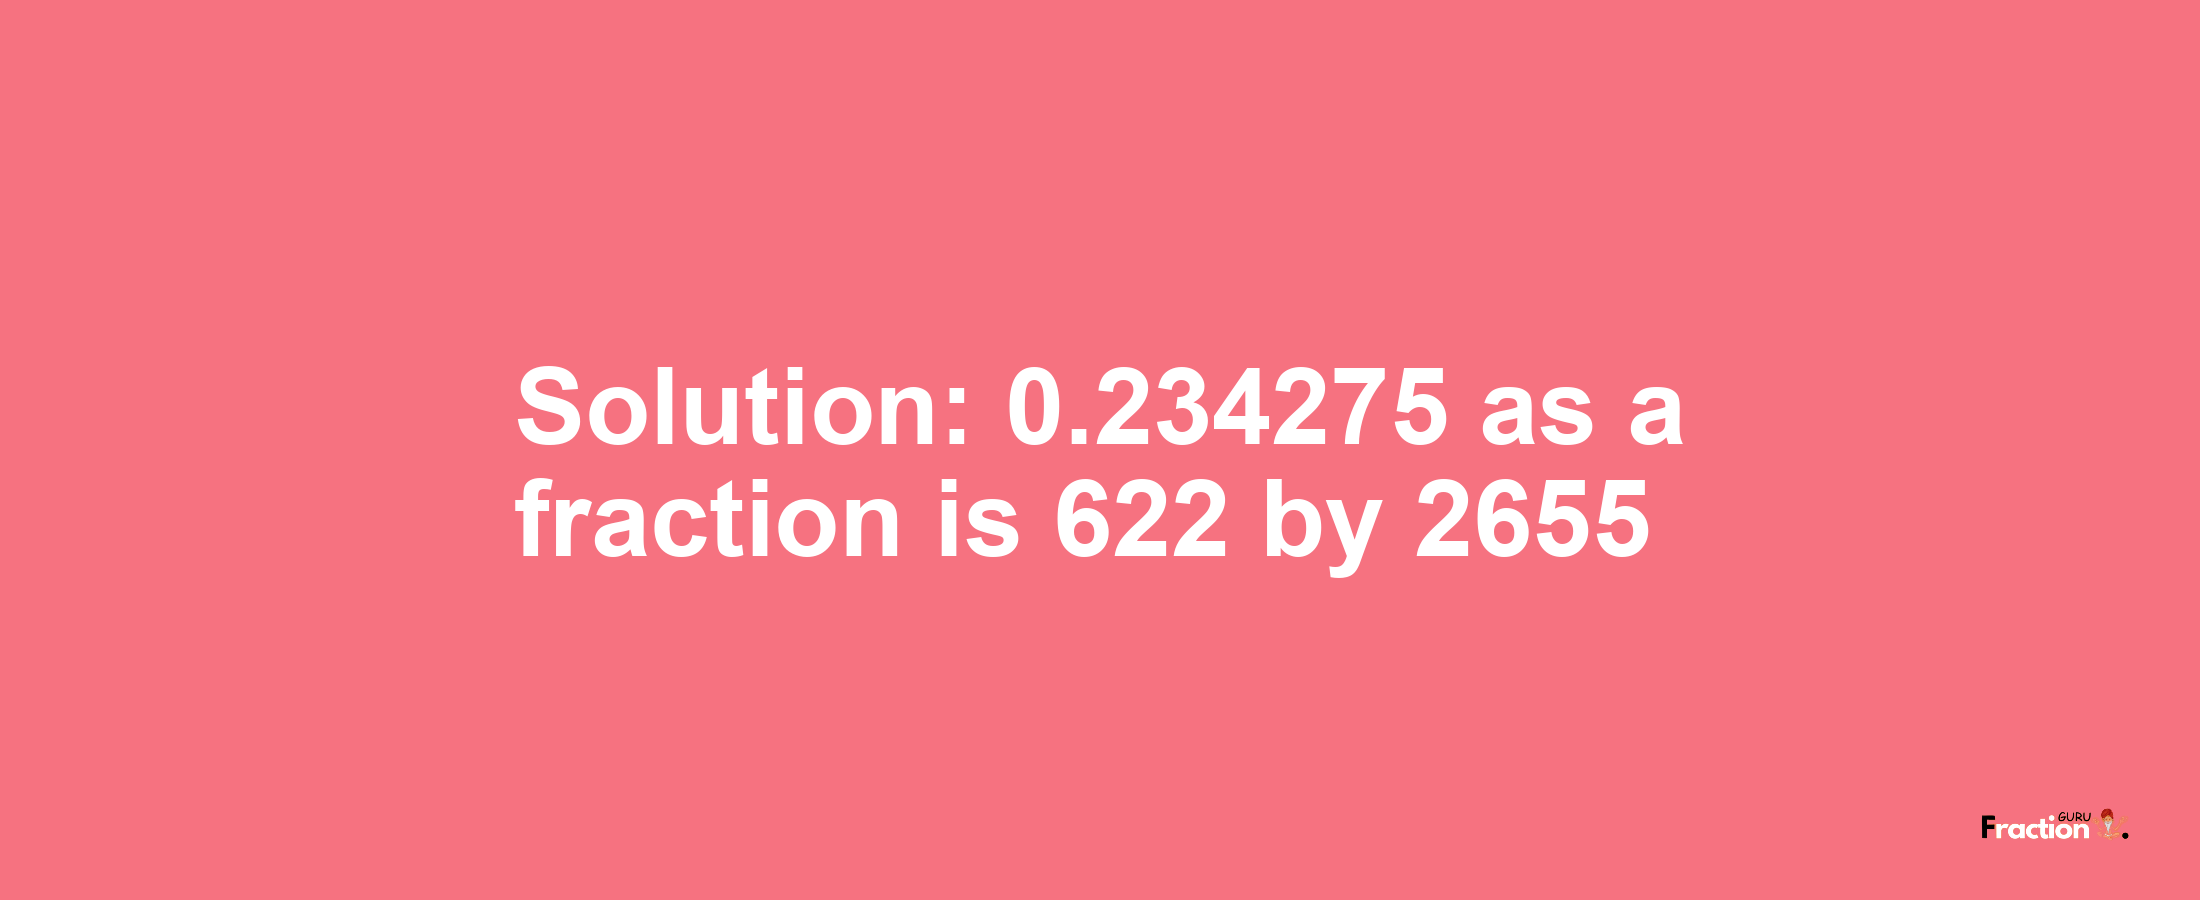 Solution:0.234275 as a fraction is 622/2655